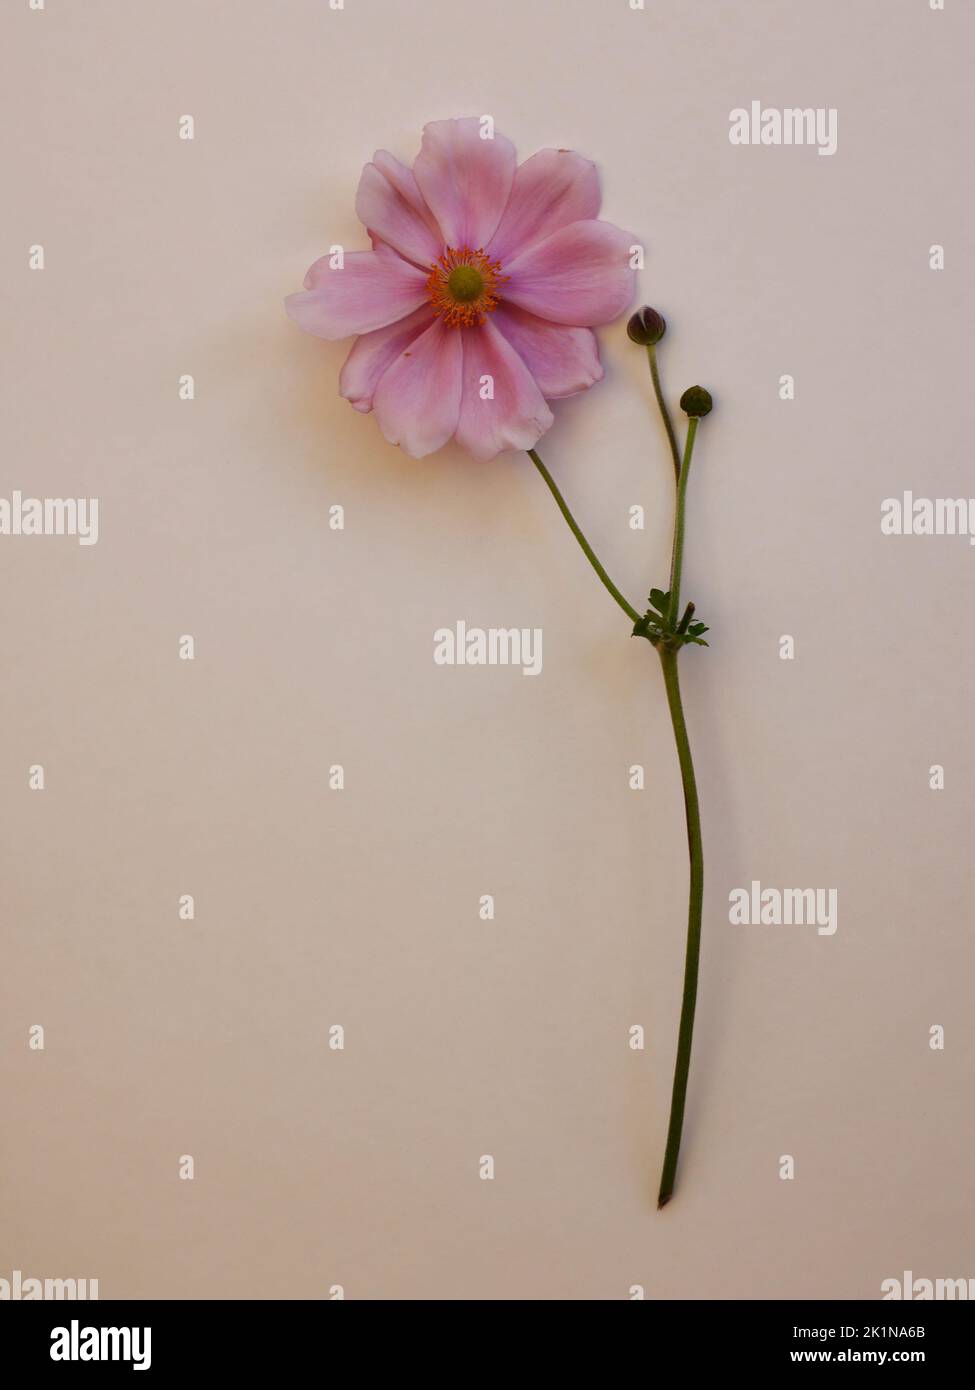 Close up of botanic view of pink flower, stem, flower buds of  herbaceous perennial  garden plant Anemone x hybrida seen against a light background. Stock Photo